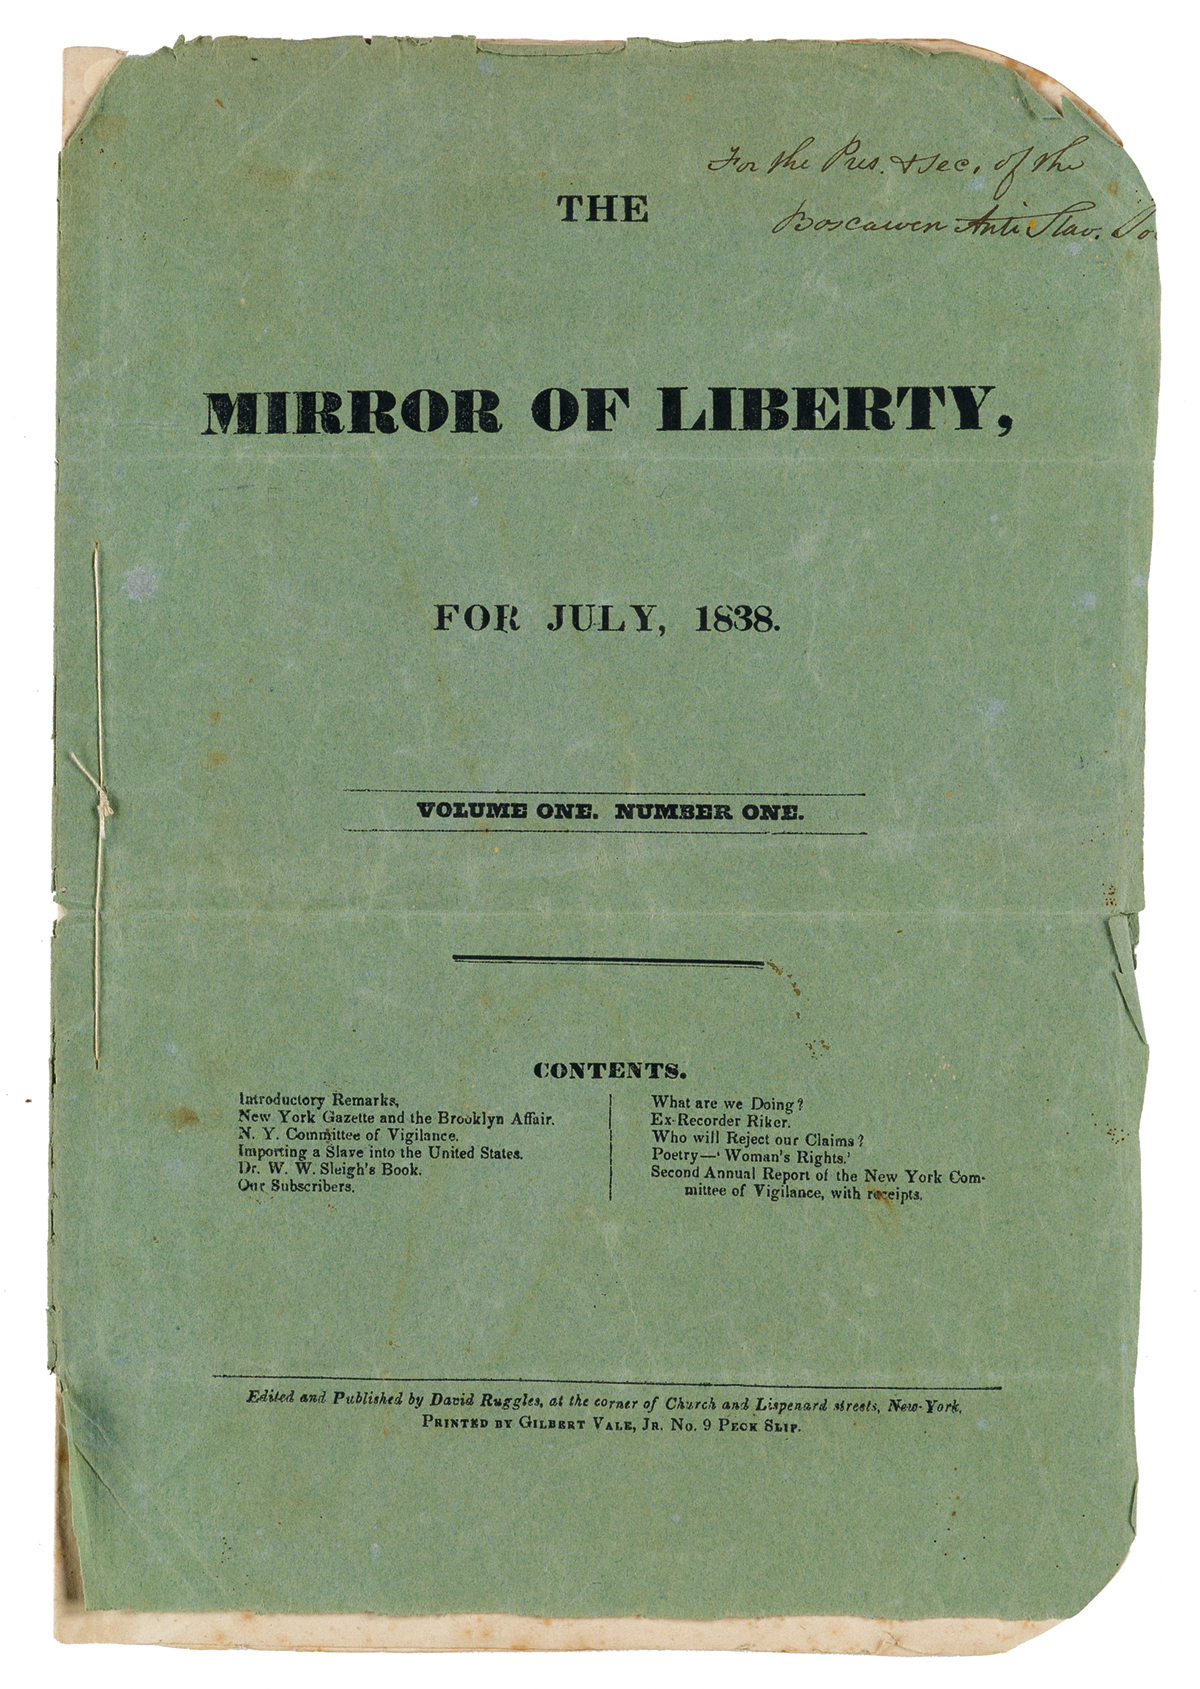 (SLAVERY AND ABOLITION.) Ruggles, David; editor. The Mirror of Liberty, for July 1838. Volume One, Number One.